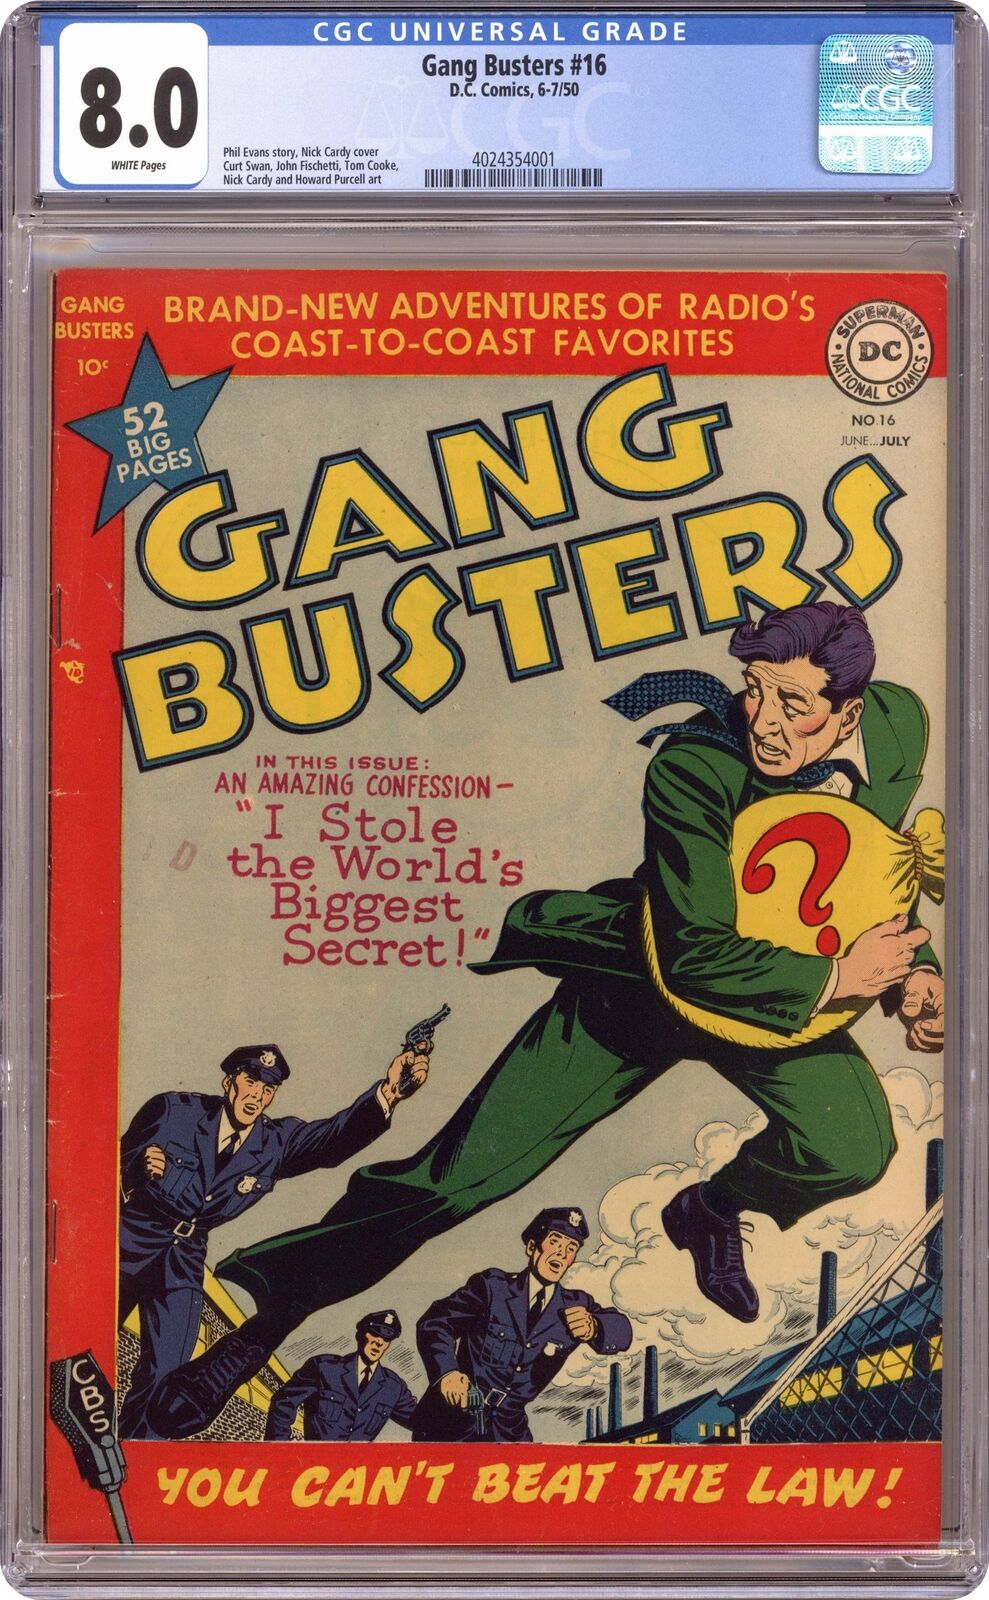 Gang Busters #16 CGC 8.0 1950 4024354001